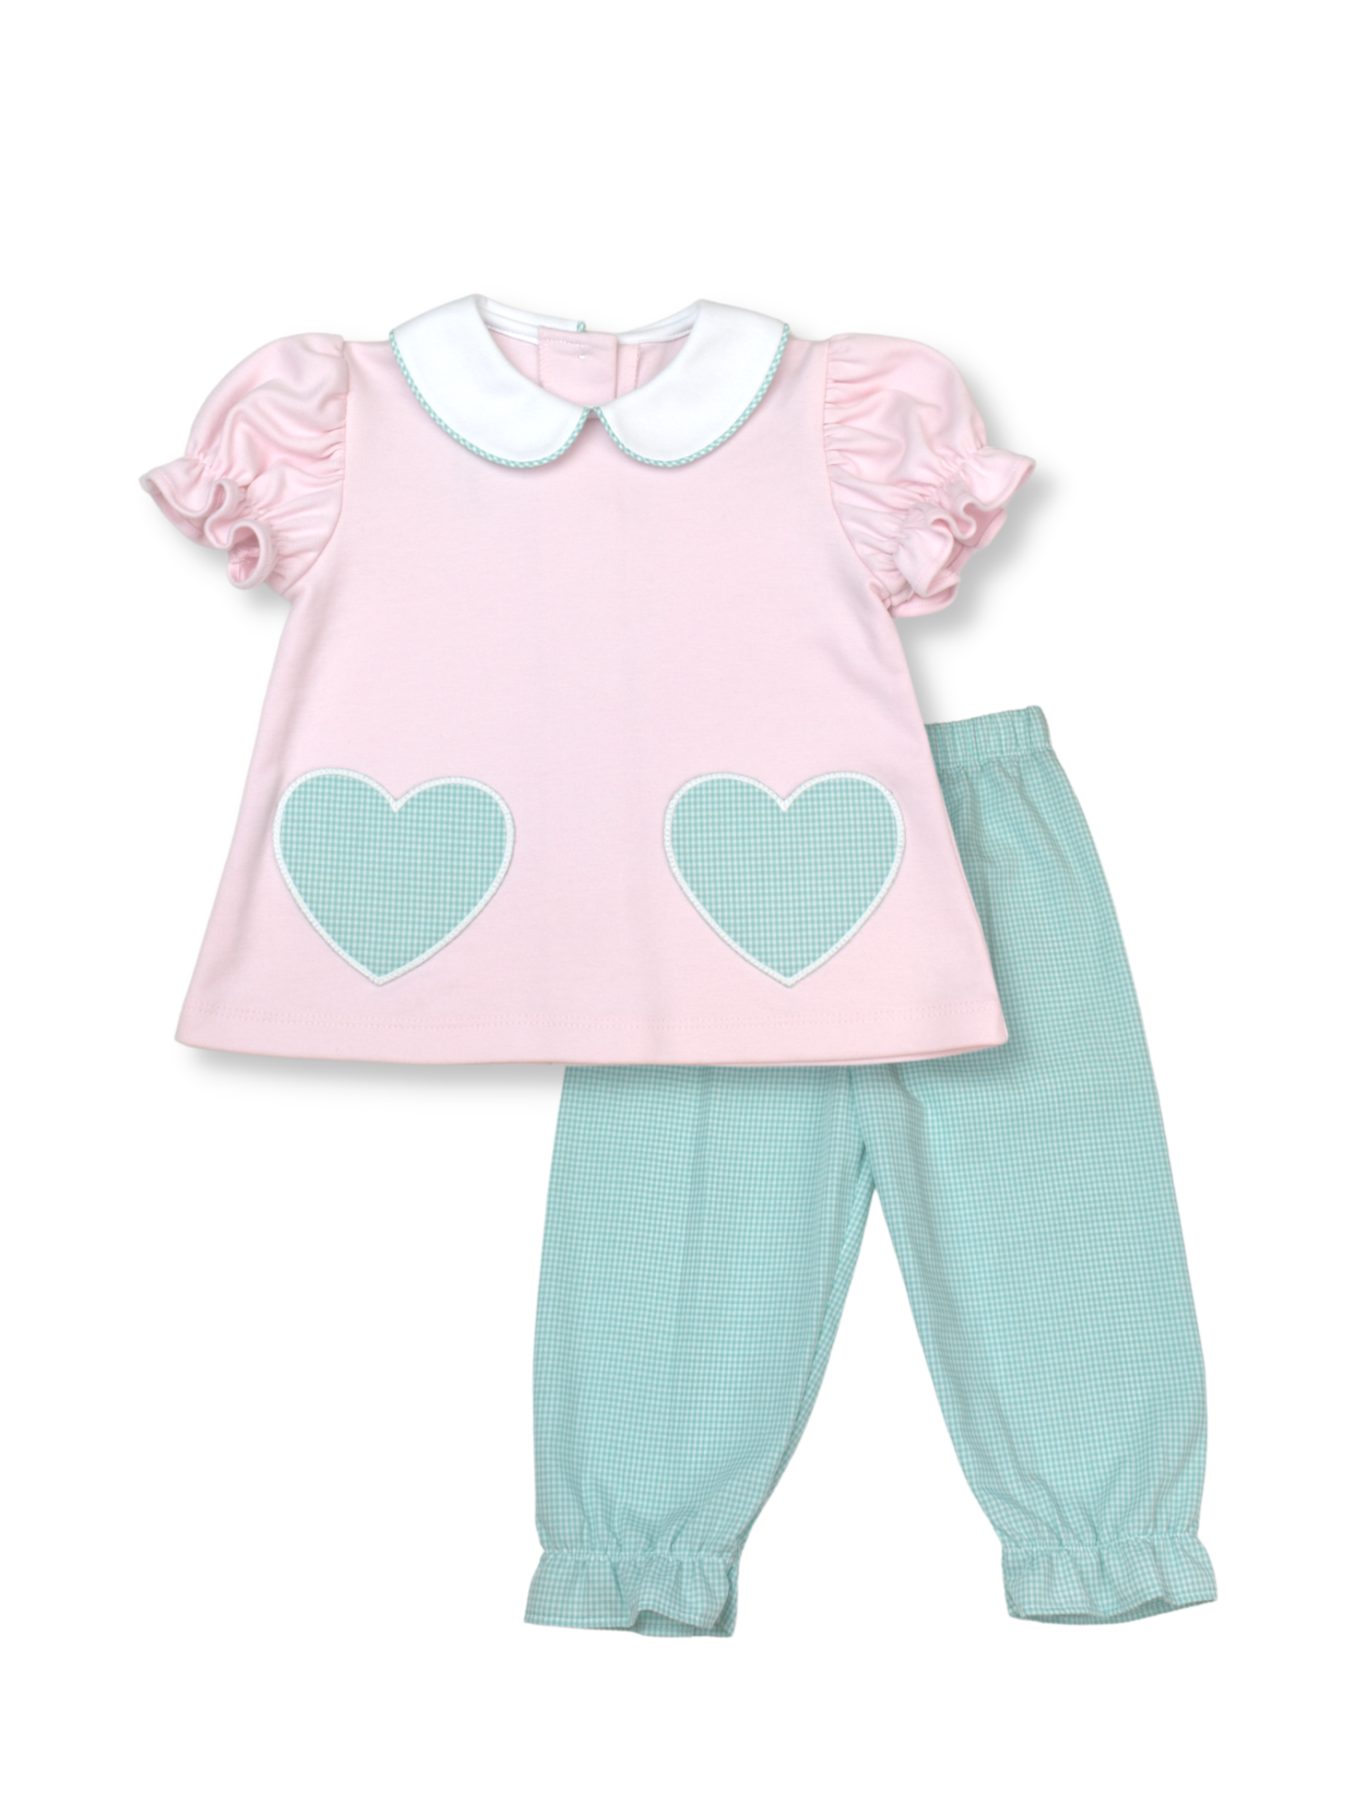 Blessings Gathered Pant - Heart Girls Sets Lullaby Set   